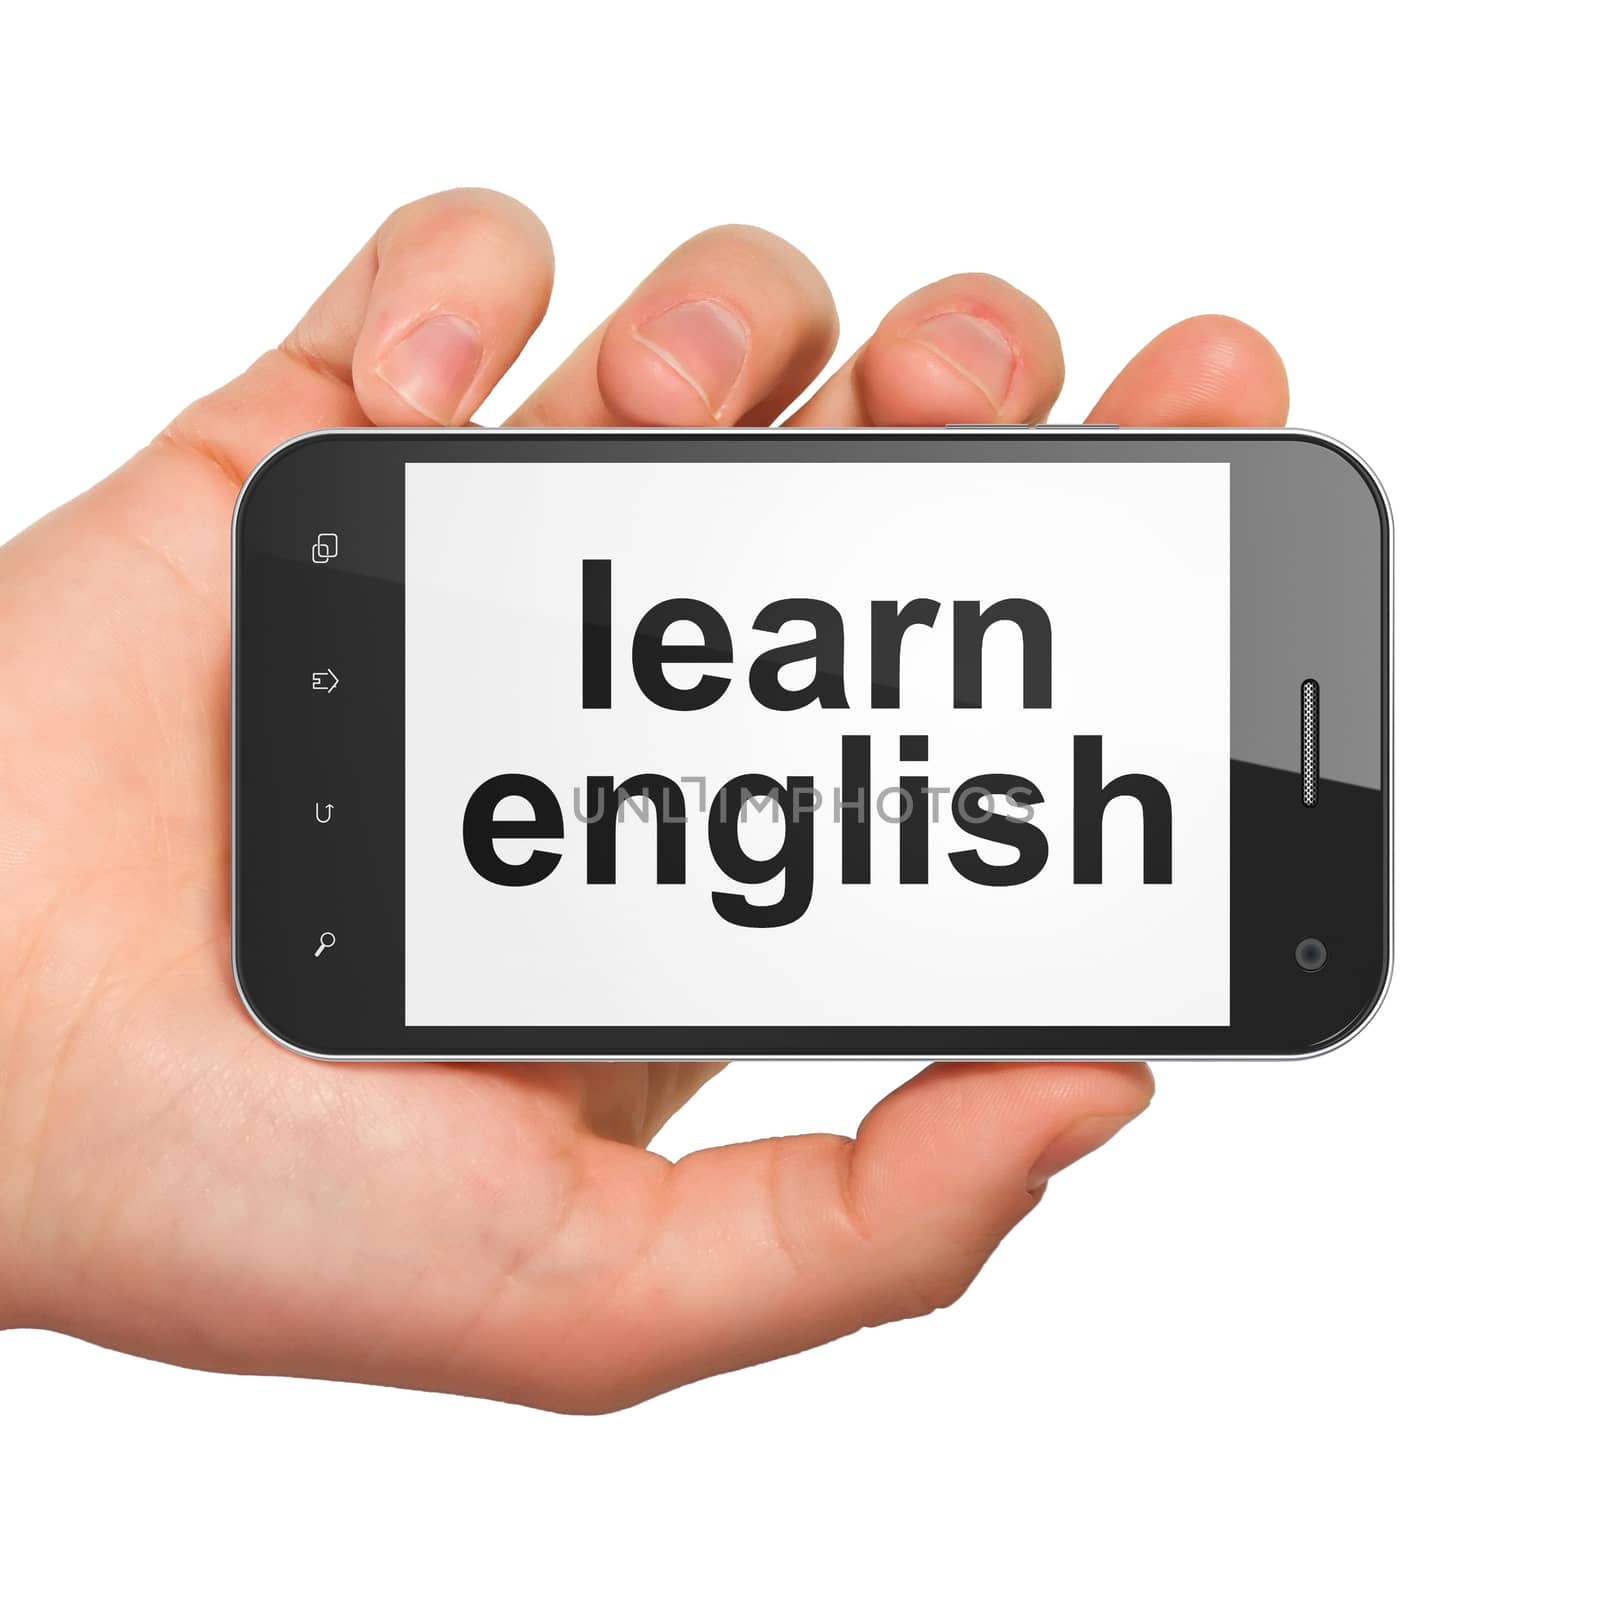 Education concept: Learn English on smartphone by maxkabakov